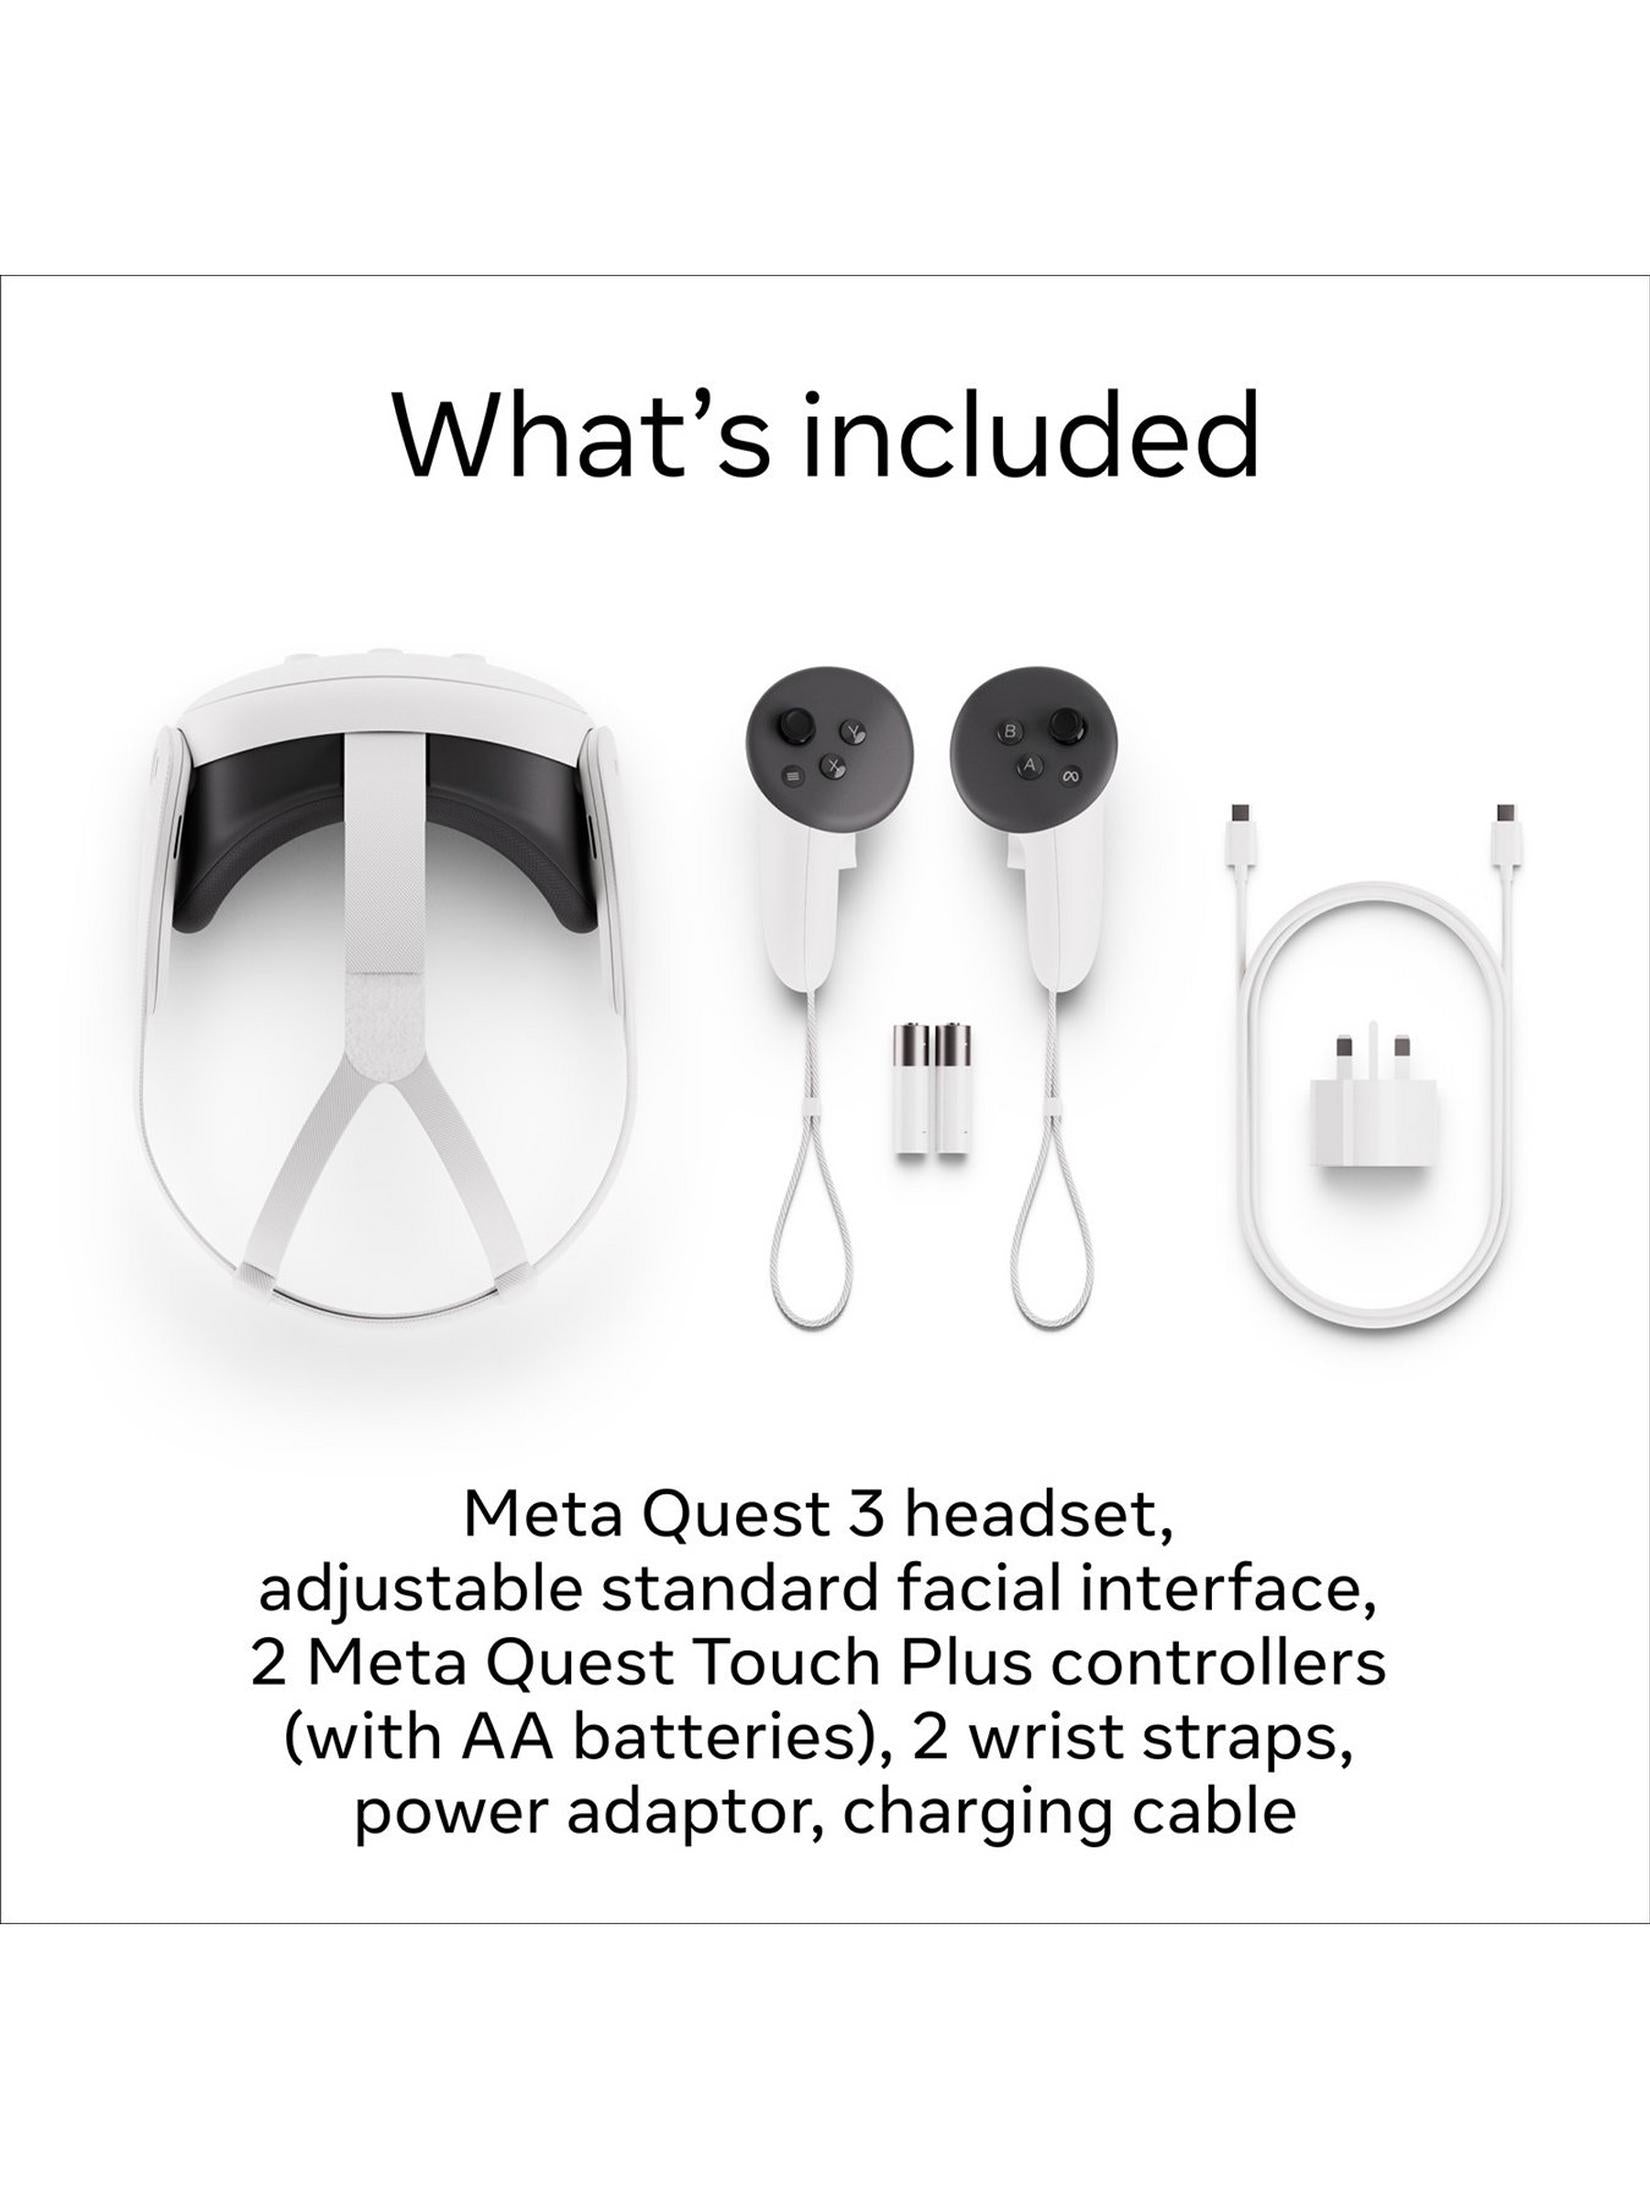 Meta Quest 3 VR headset with controller.